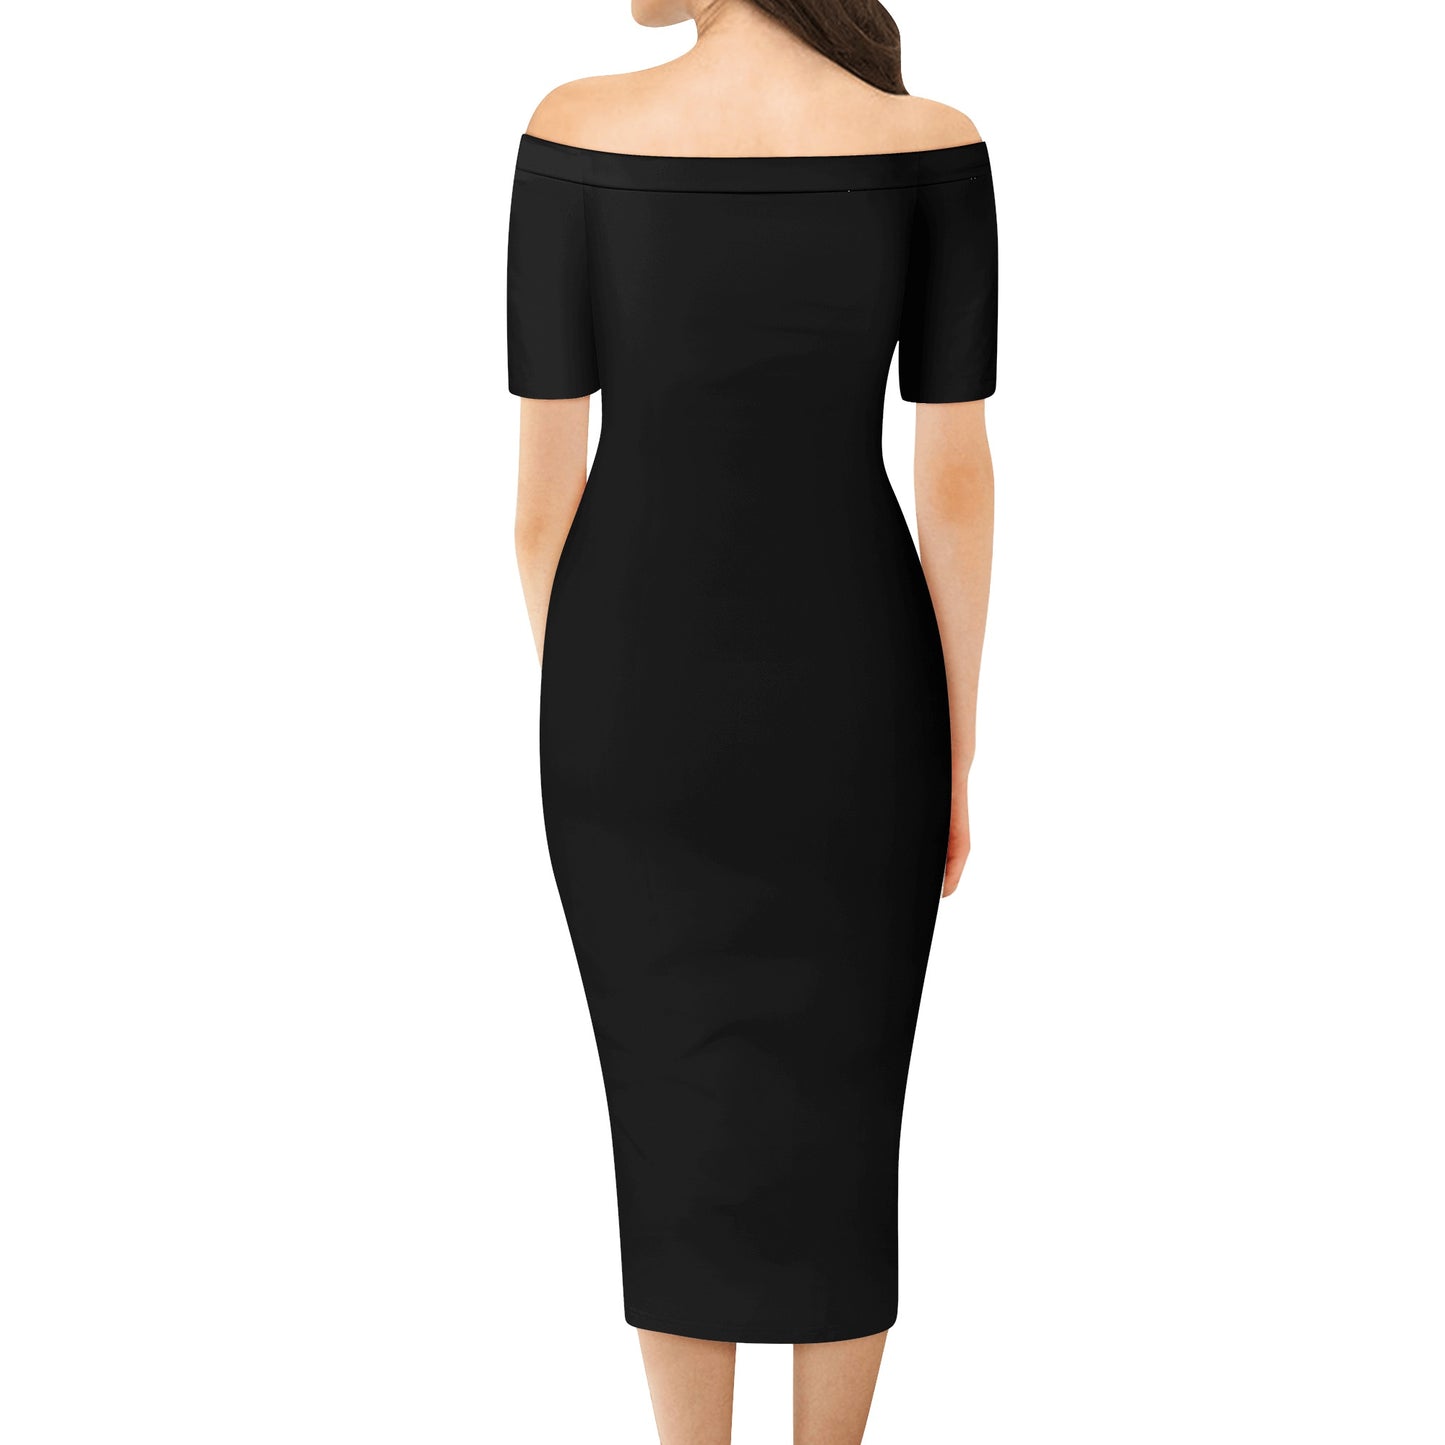 Fly Dre Womens Off The Shoulder Office Lady Dress